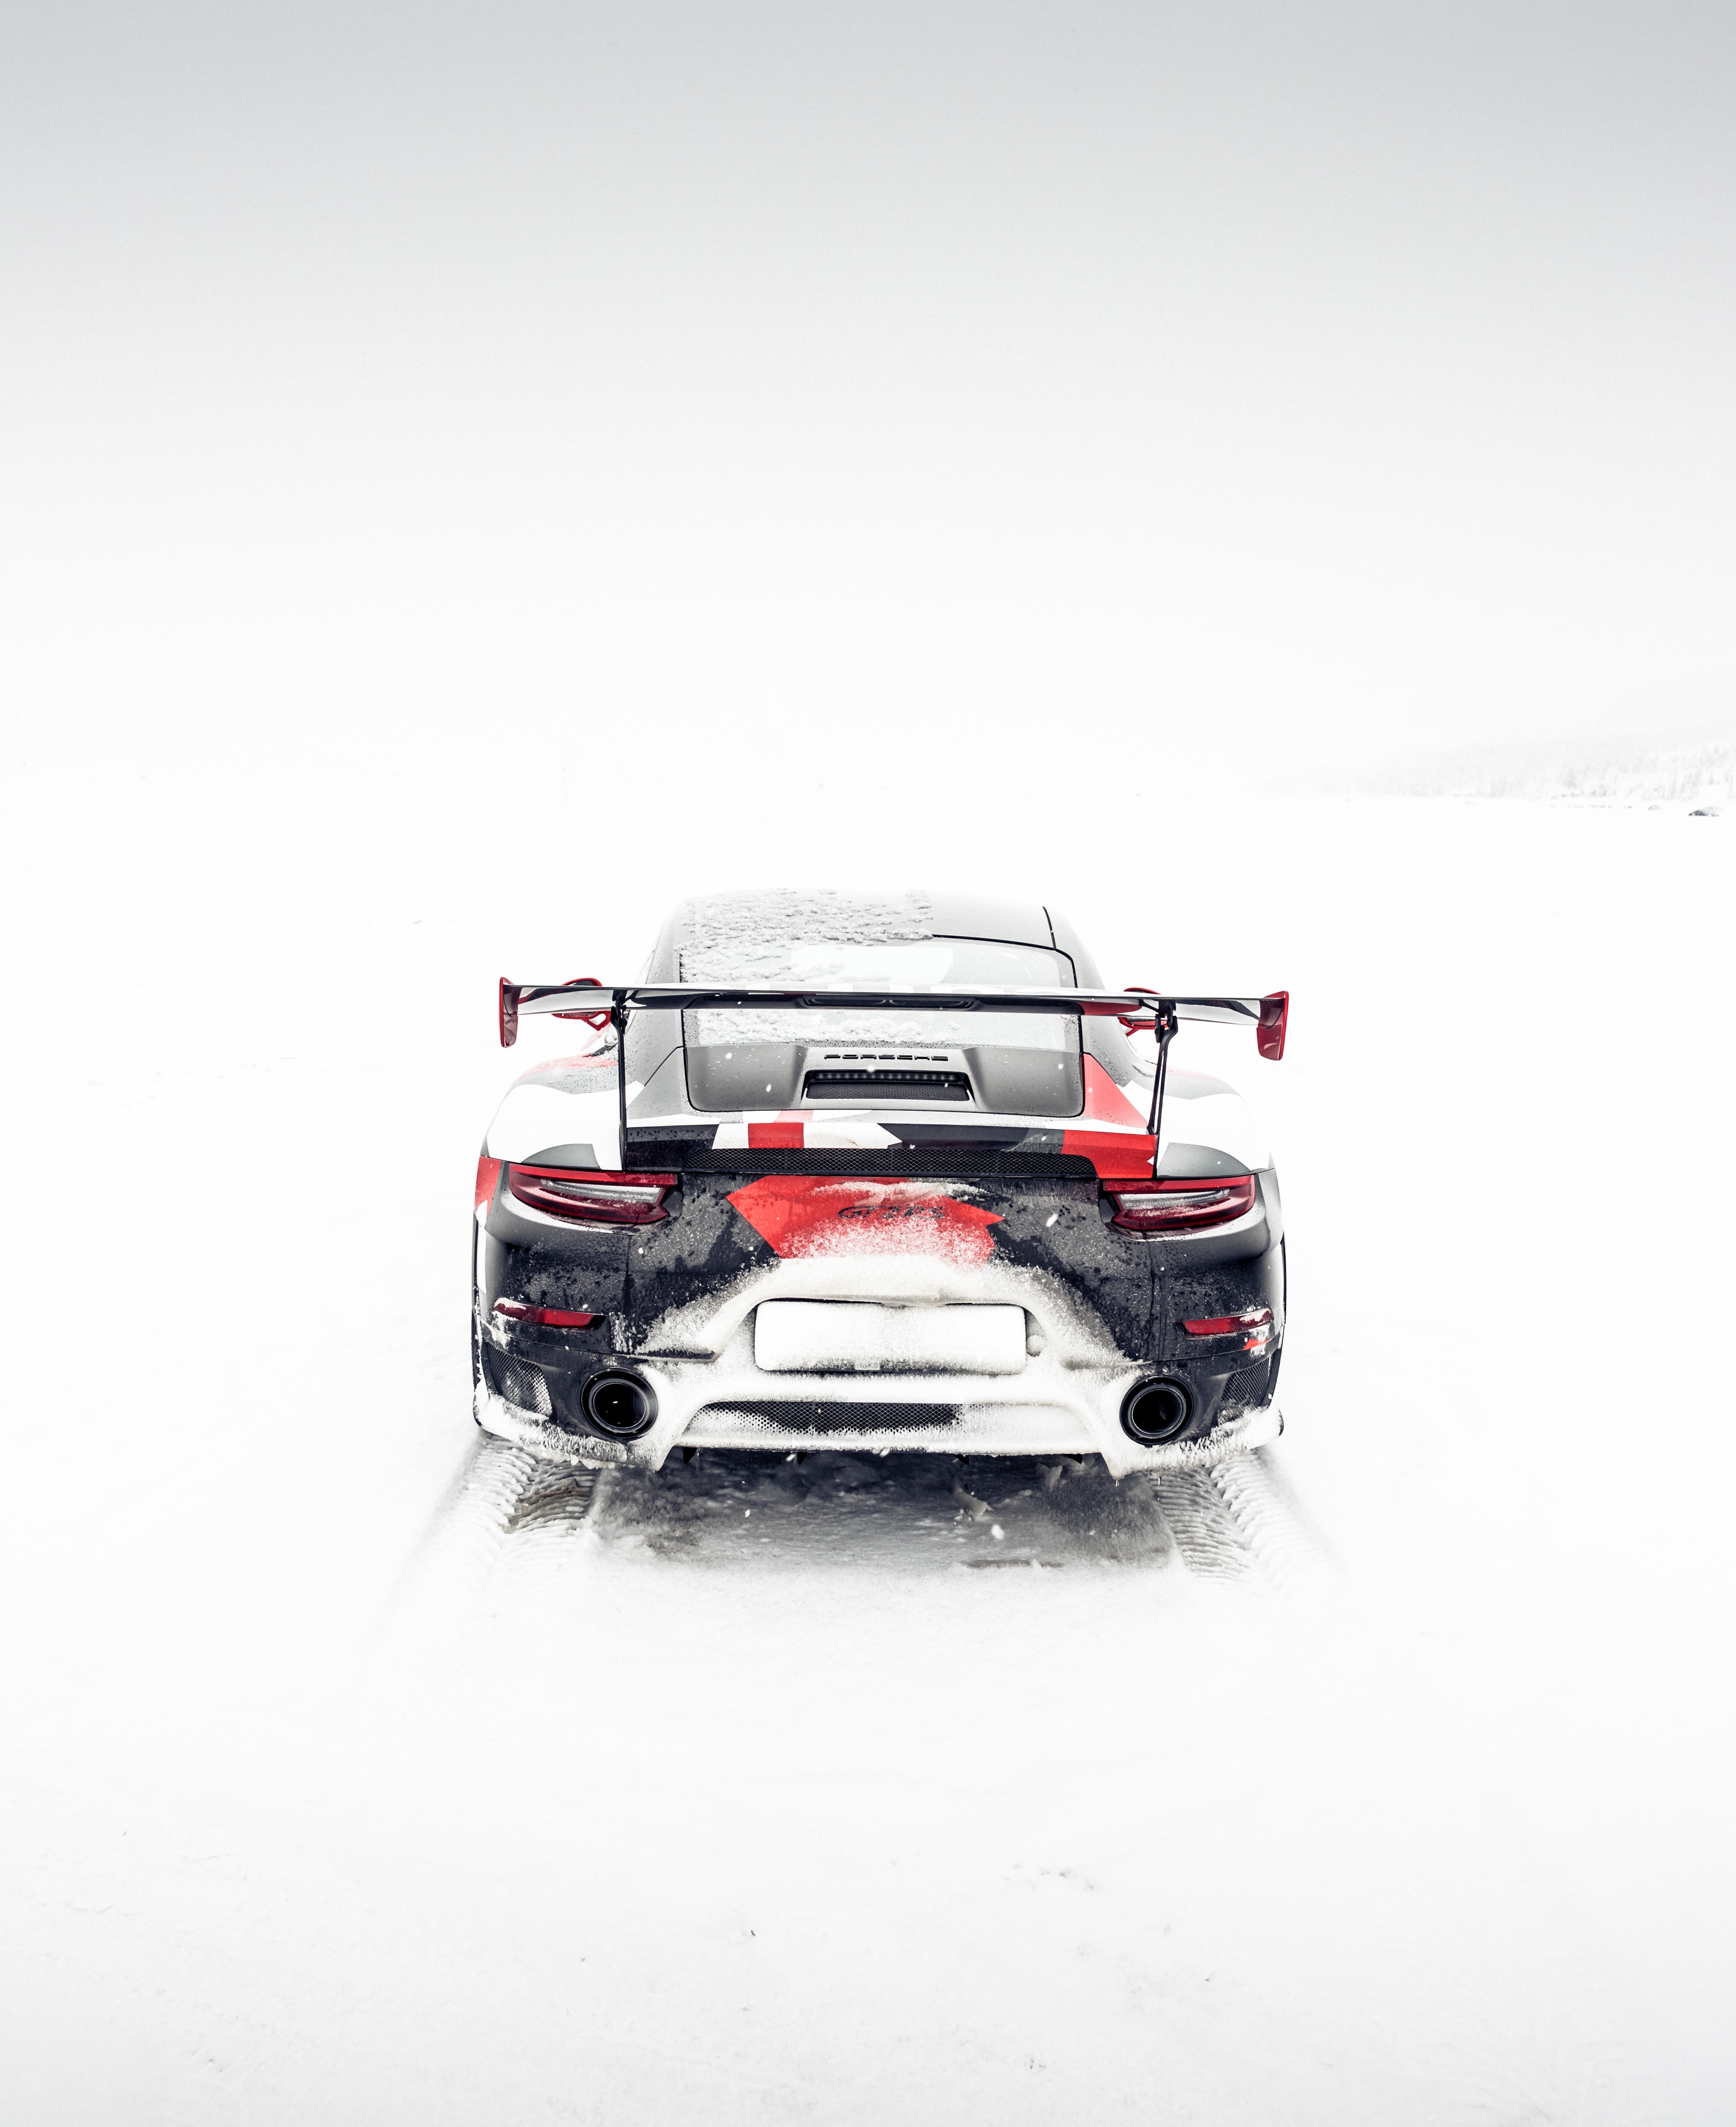 sports car, cars, sports, winter, snow, back view, rear view, off road, impassability